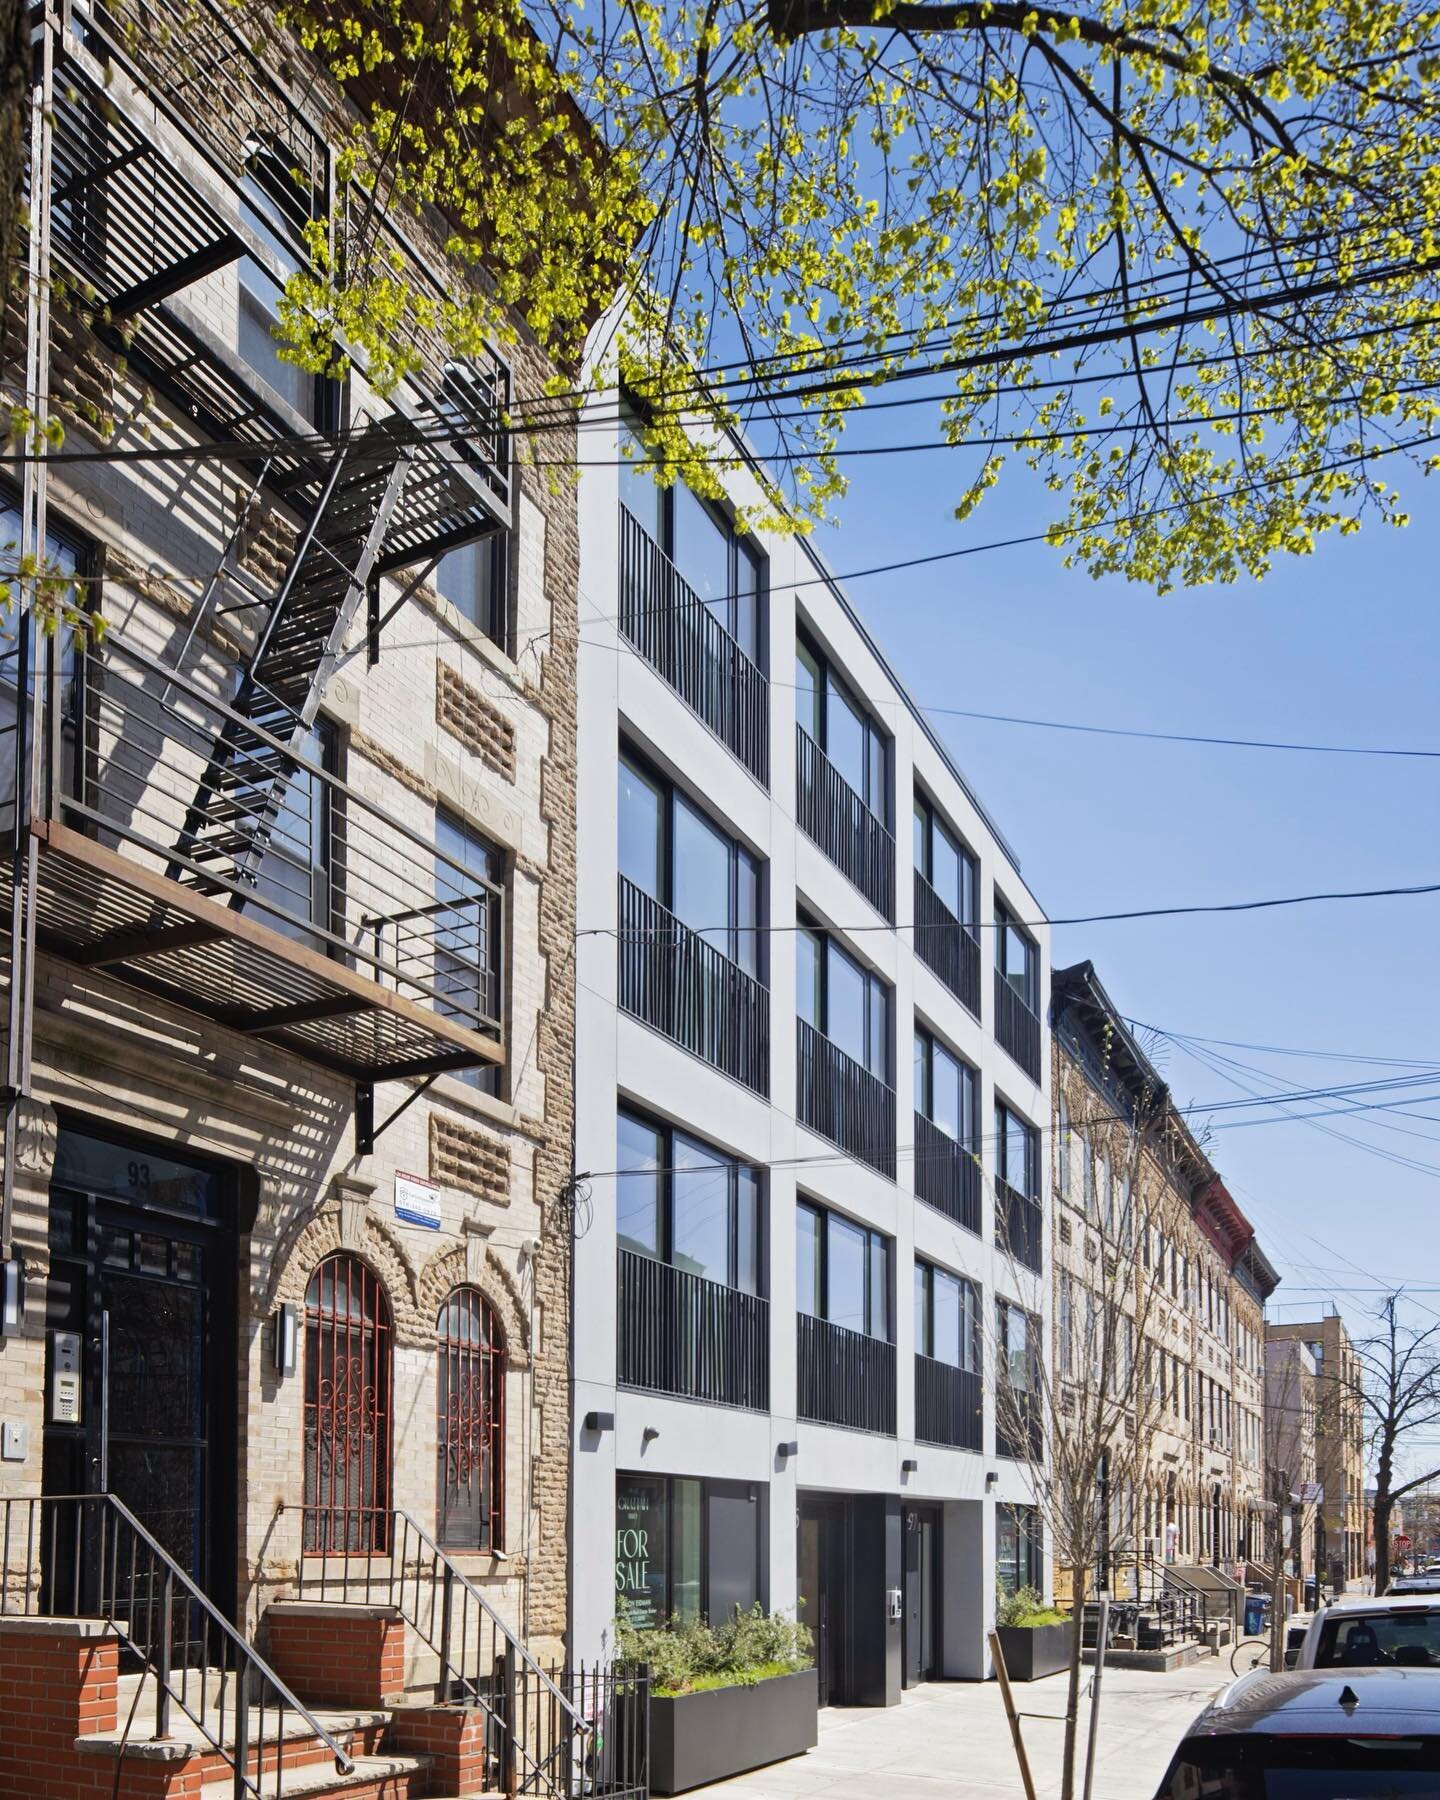 Excited to announce 95 Grattan is part of Archello's Best Projects of 2022

https://archello.com/project/95-grattan

Architect: AB Aarchitekten
Location: 95-97 Grattan Street Brooklyn, NY, USA 
Project Year: 2022 
Category: Individual Buildings/ Apar